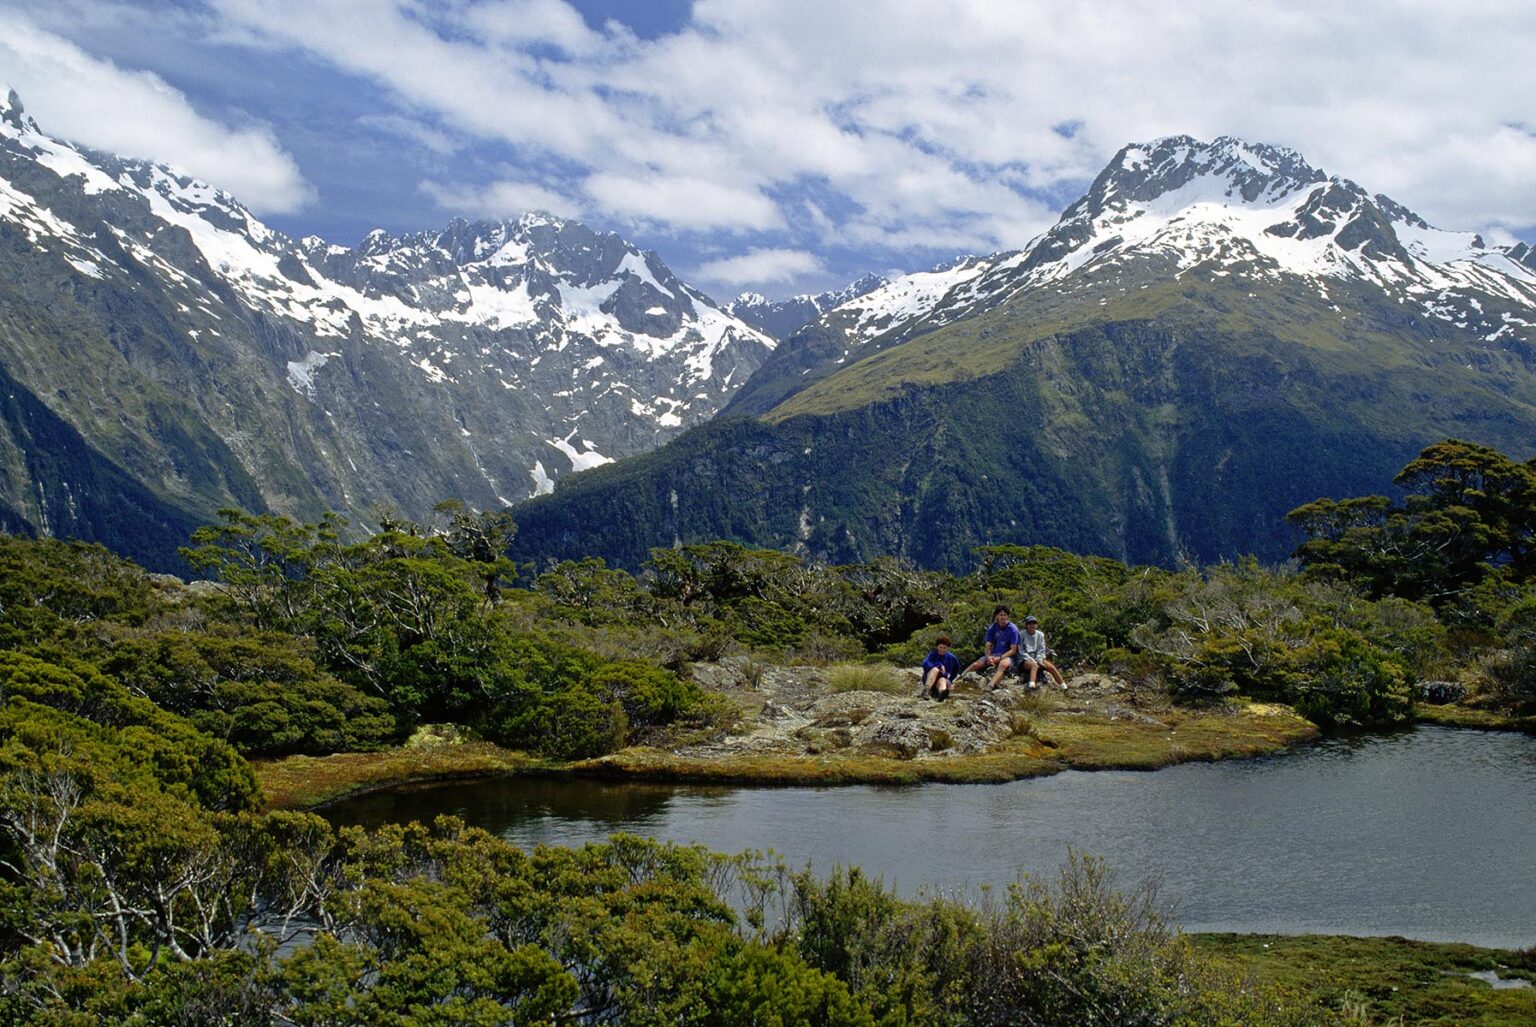 Trekkers rest on KEY SUMMIT with MT CHRISTINA & MT CROSSCUT (R) as backdrop - FIORDLAND NATIONAL PARK, NEW ZEALAND'S SOUTHLAND